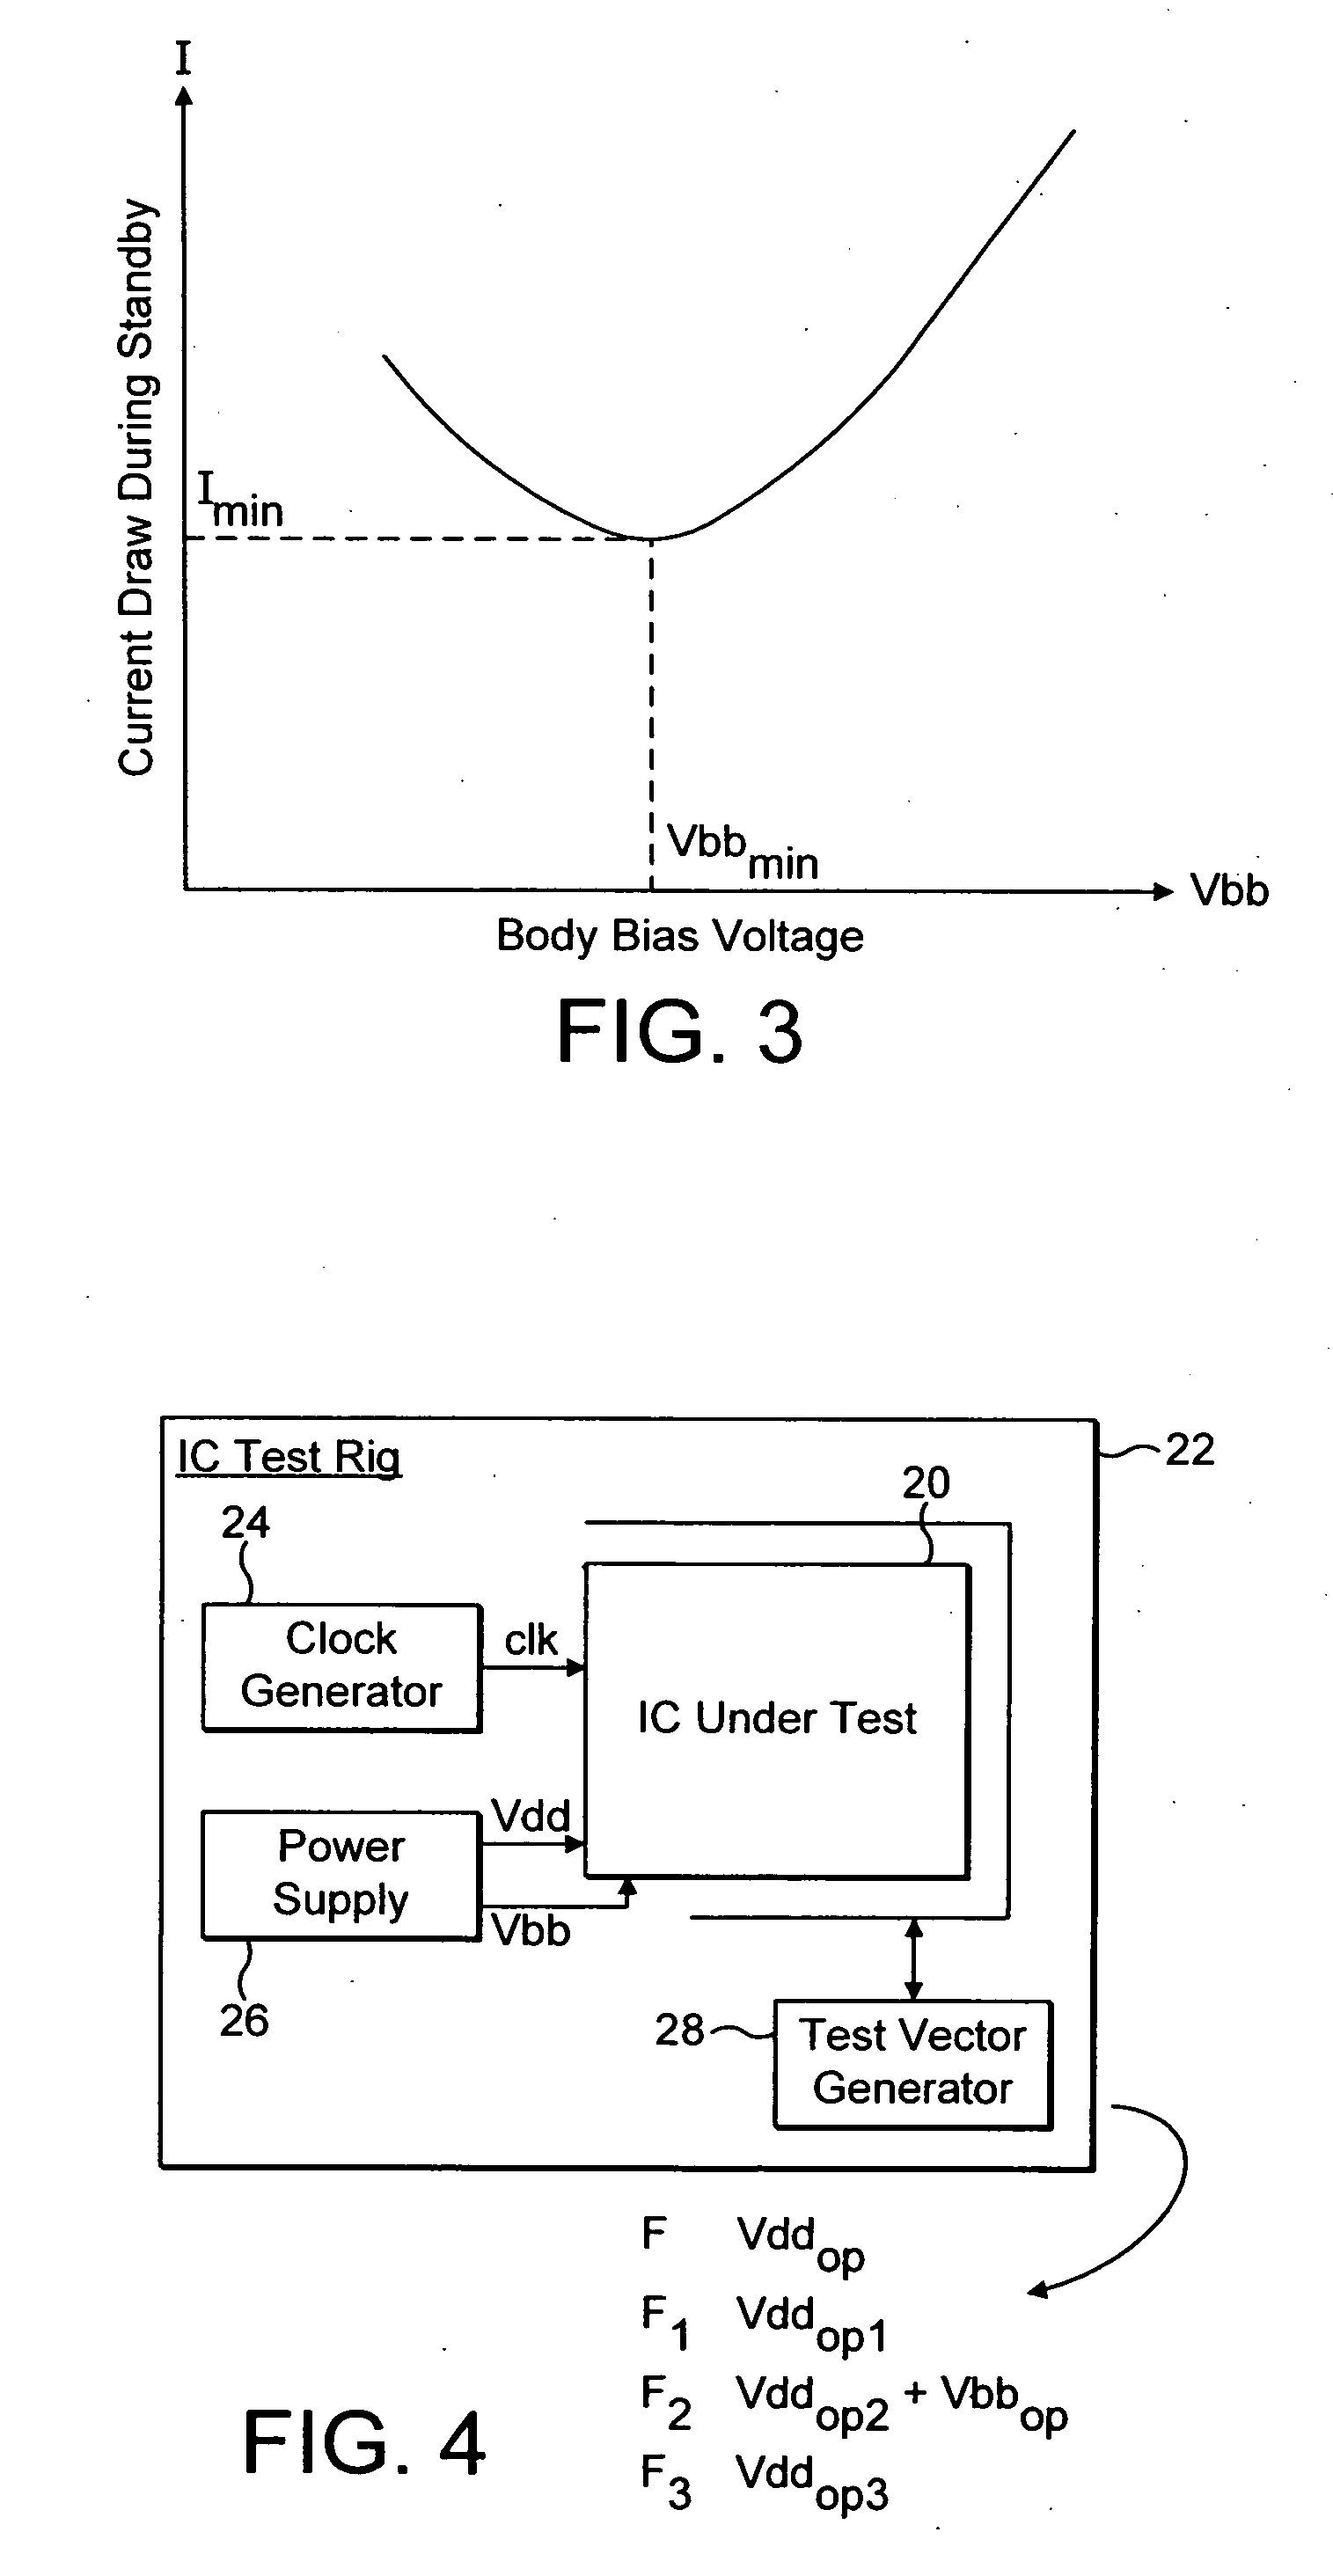 Operating voltage determination for an integrated circuit